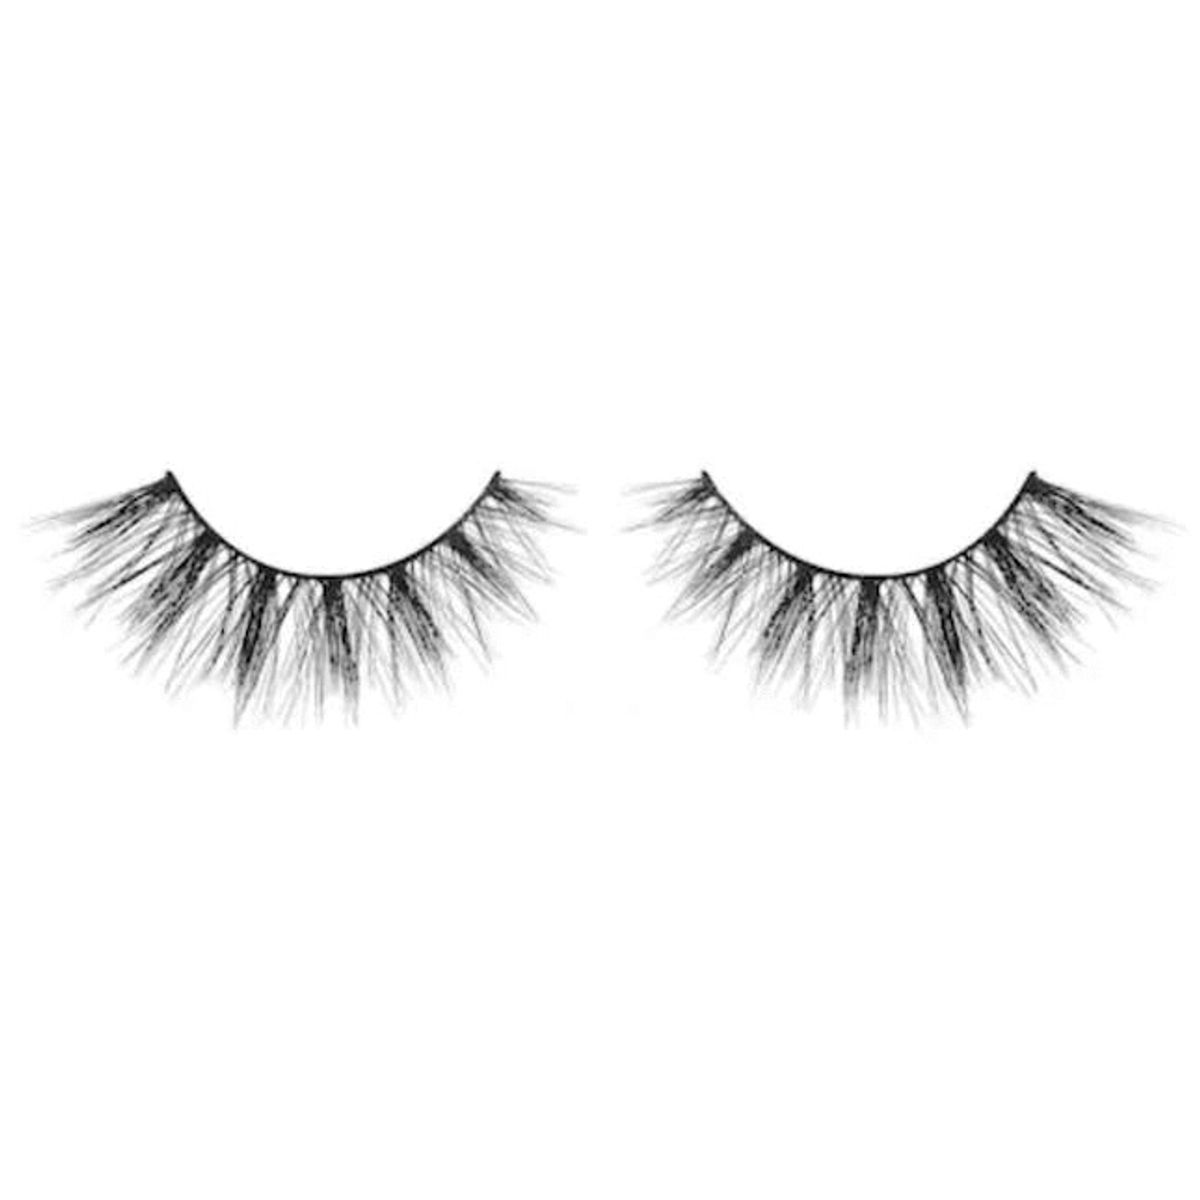 14 False Lashes That Look Better Than Extensions